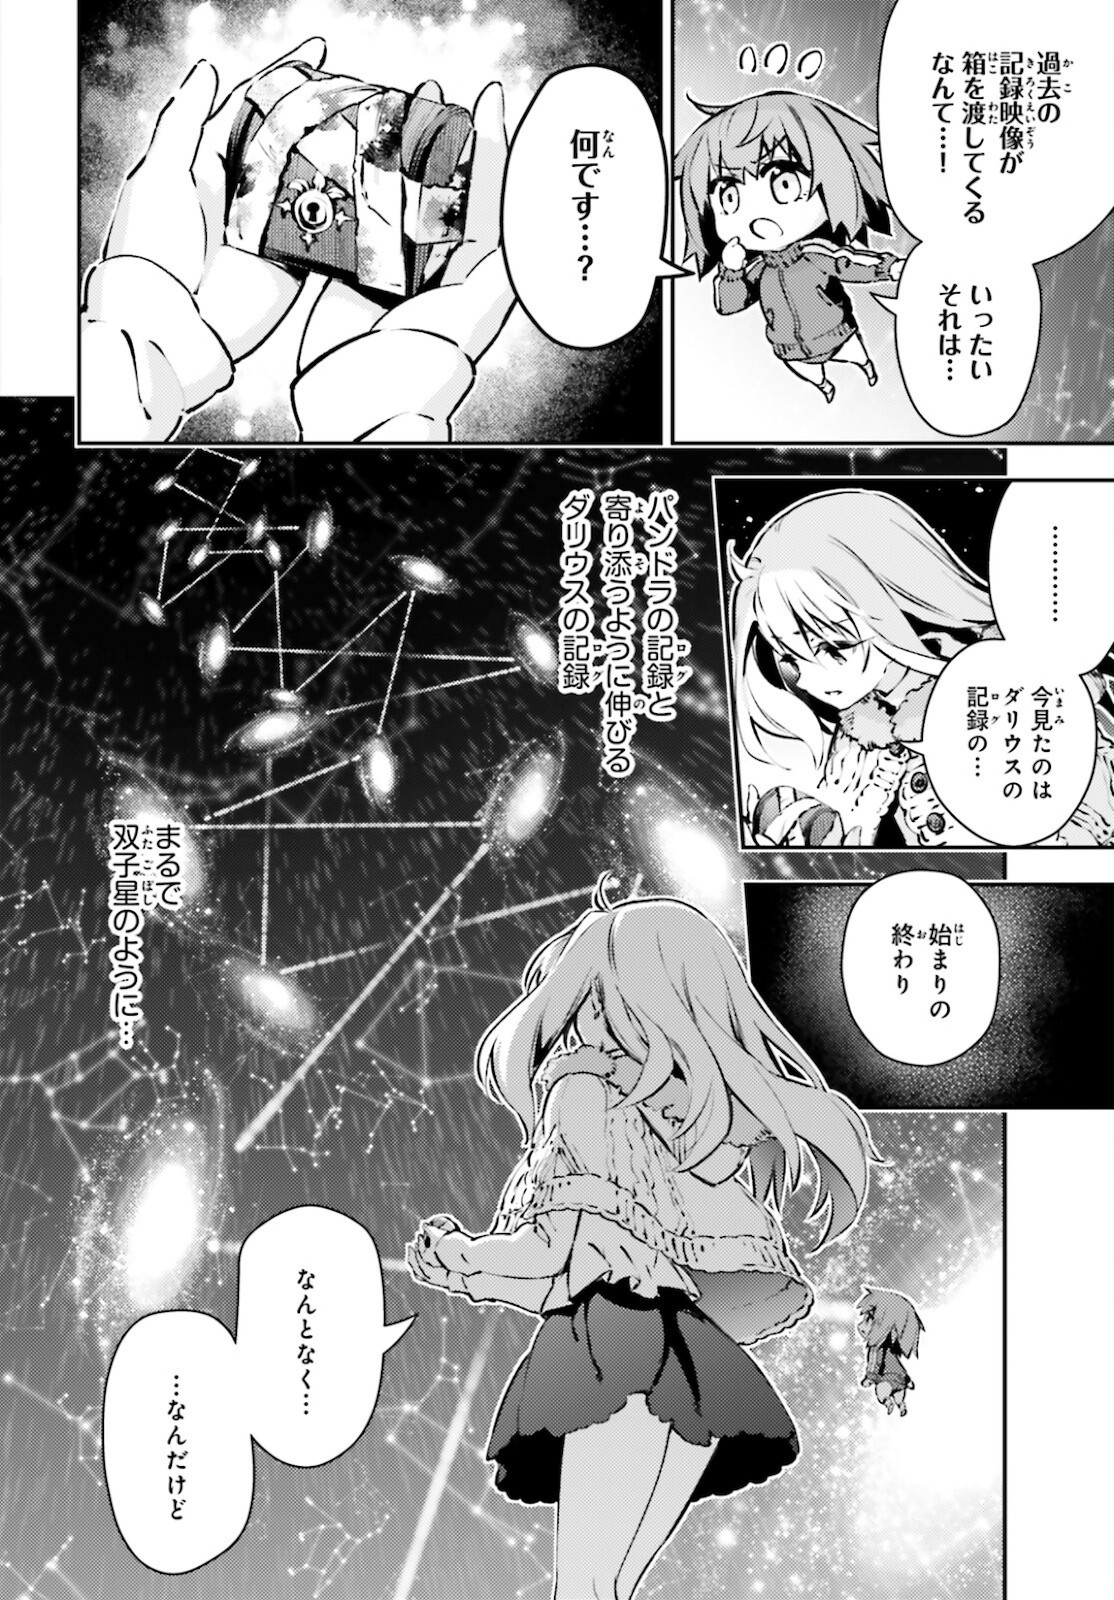 Fate/Kaleid Liner Prisma Illya Drei! - Chapter 66-1 - Page 4